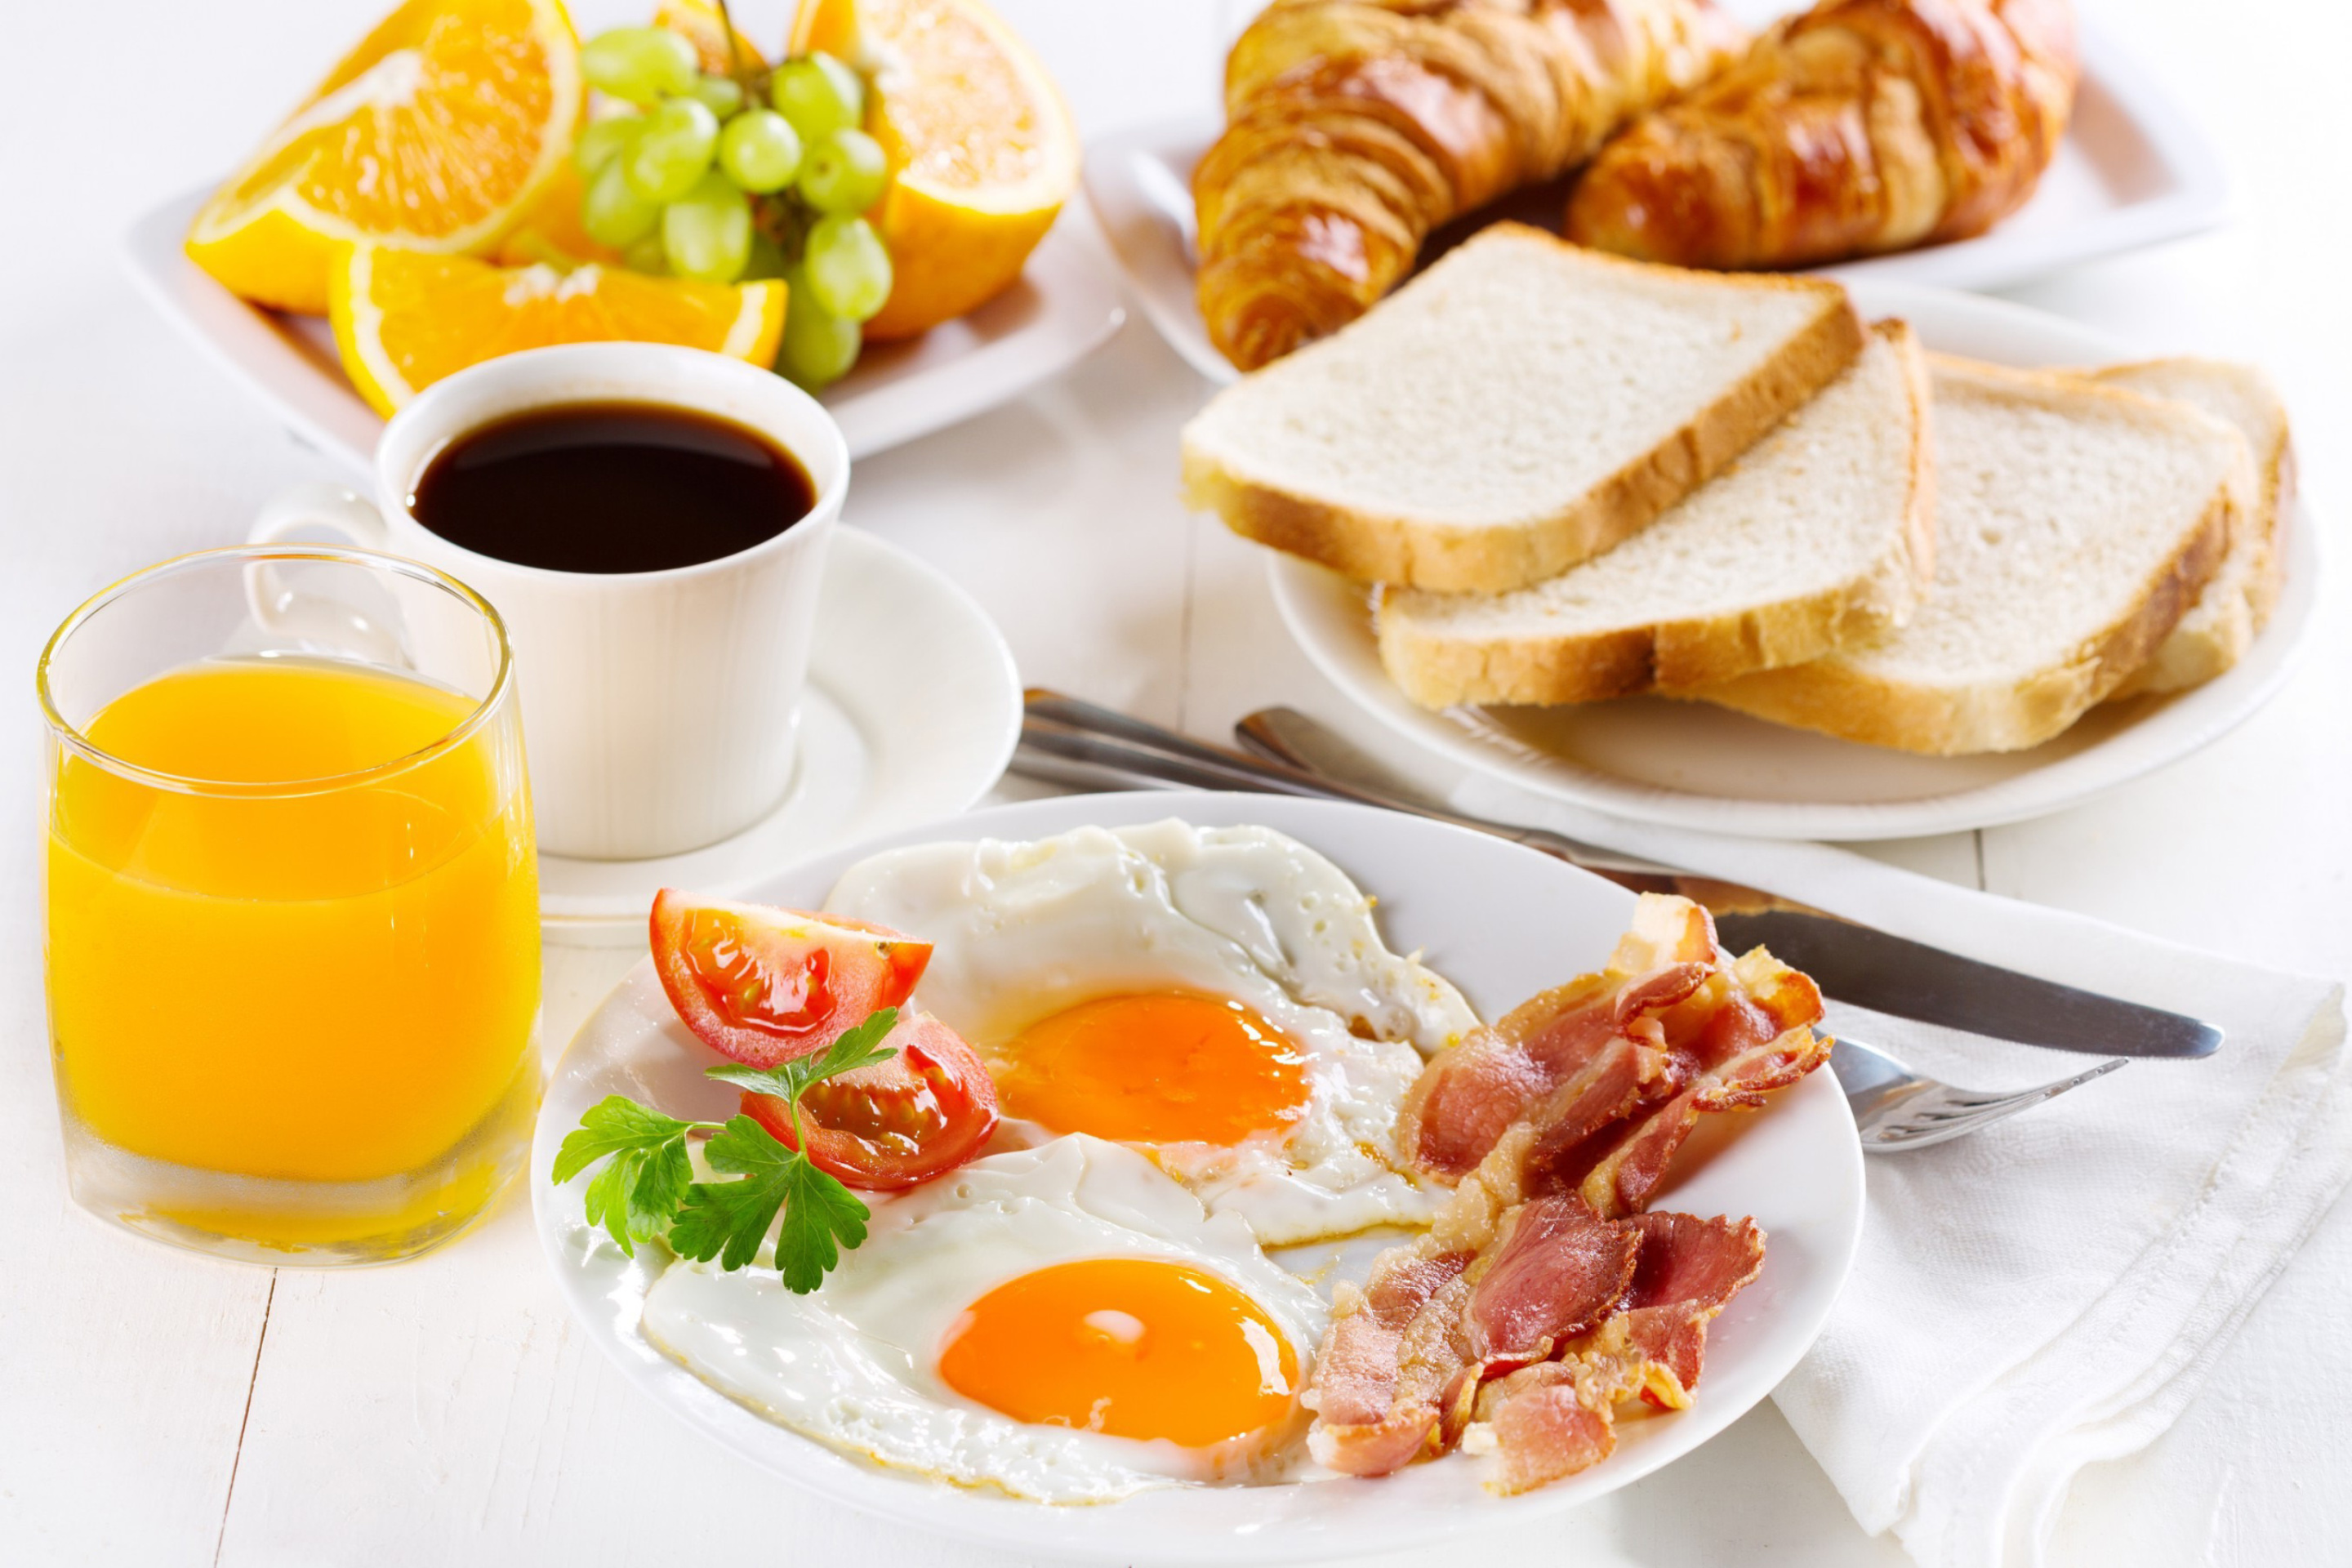 Breakfast with espresso and orange juice Wallpaper for 2880x1920